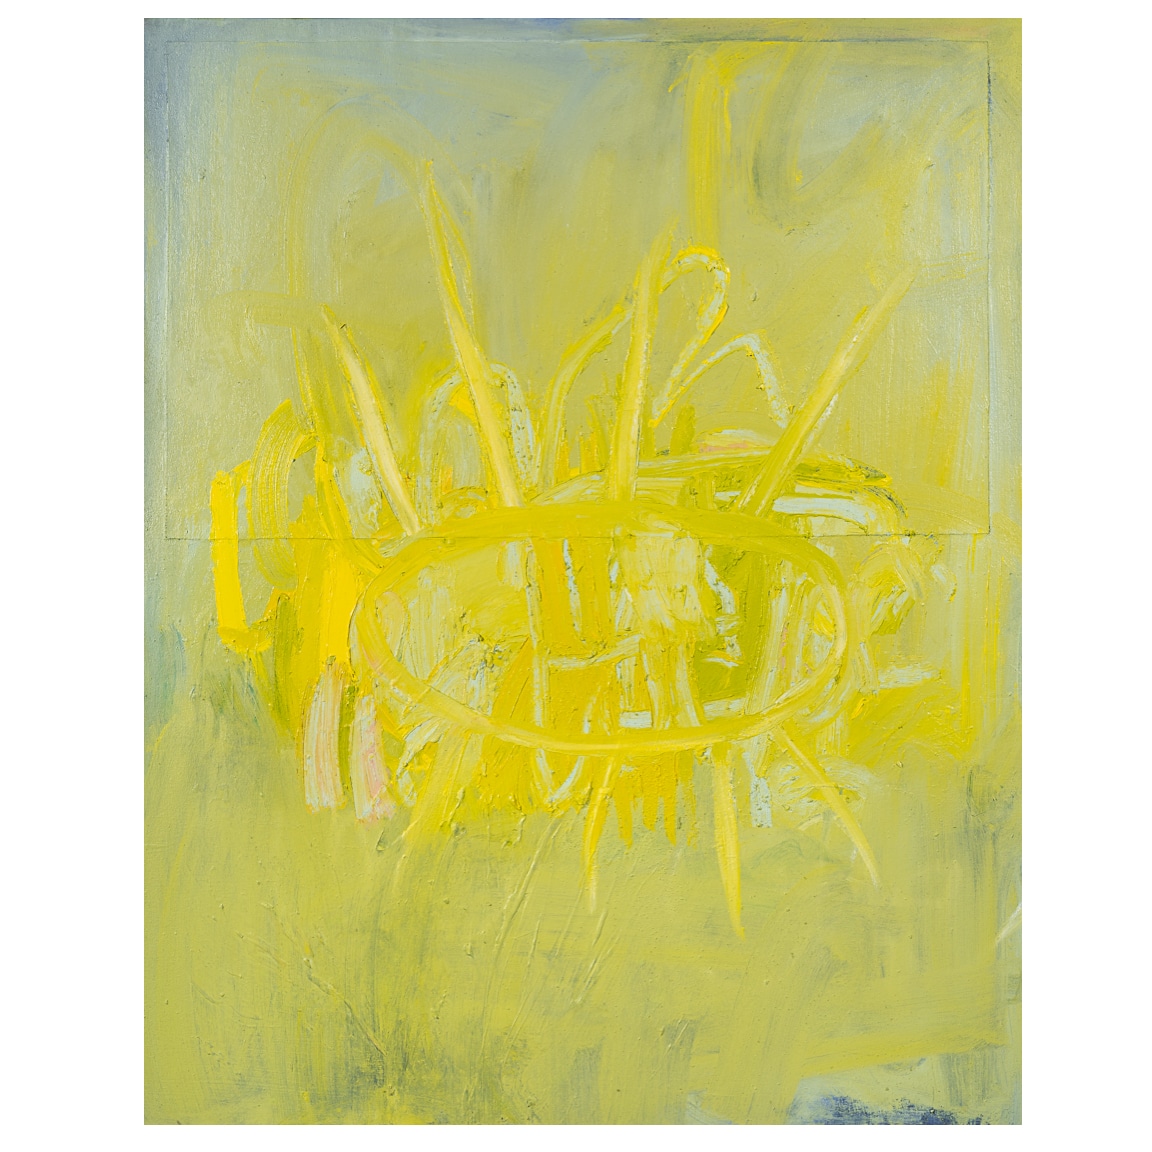 Large yellow abstract expressionist painting by Los Angeles artist Laura Letchinger